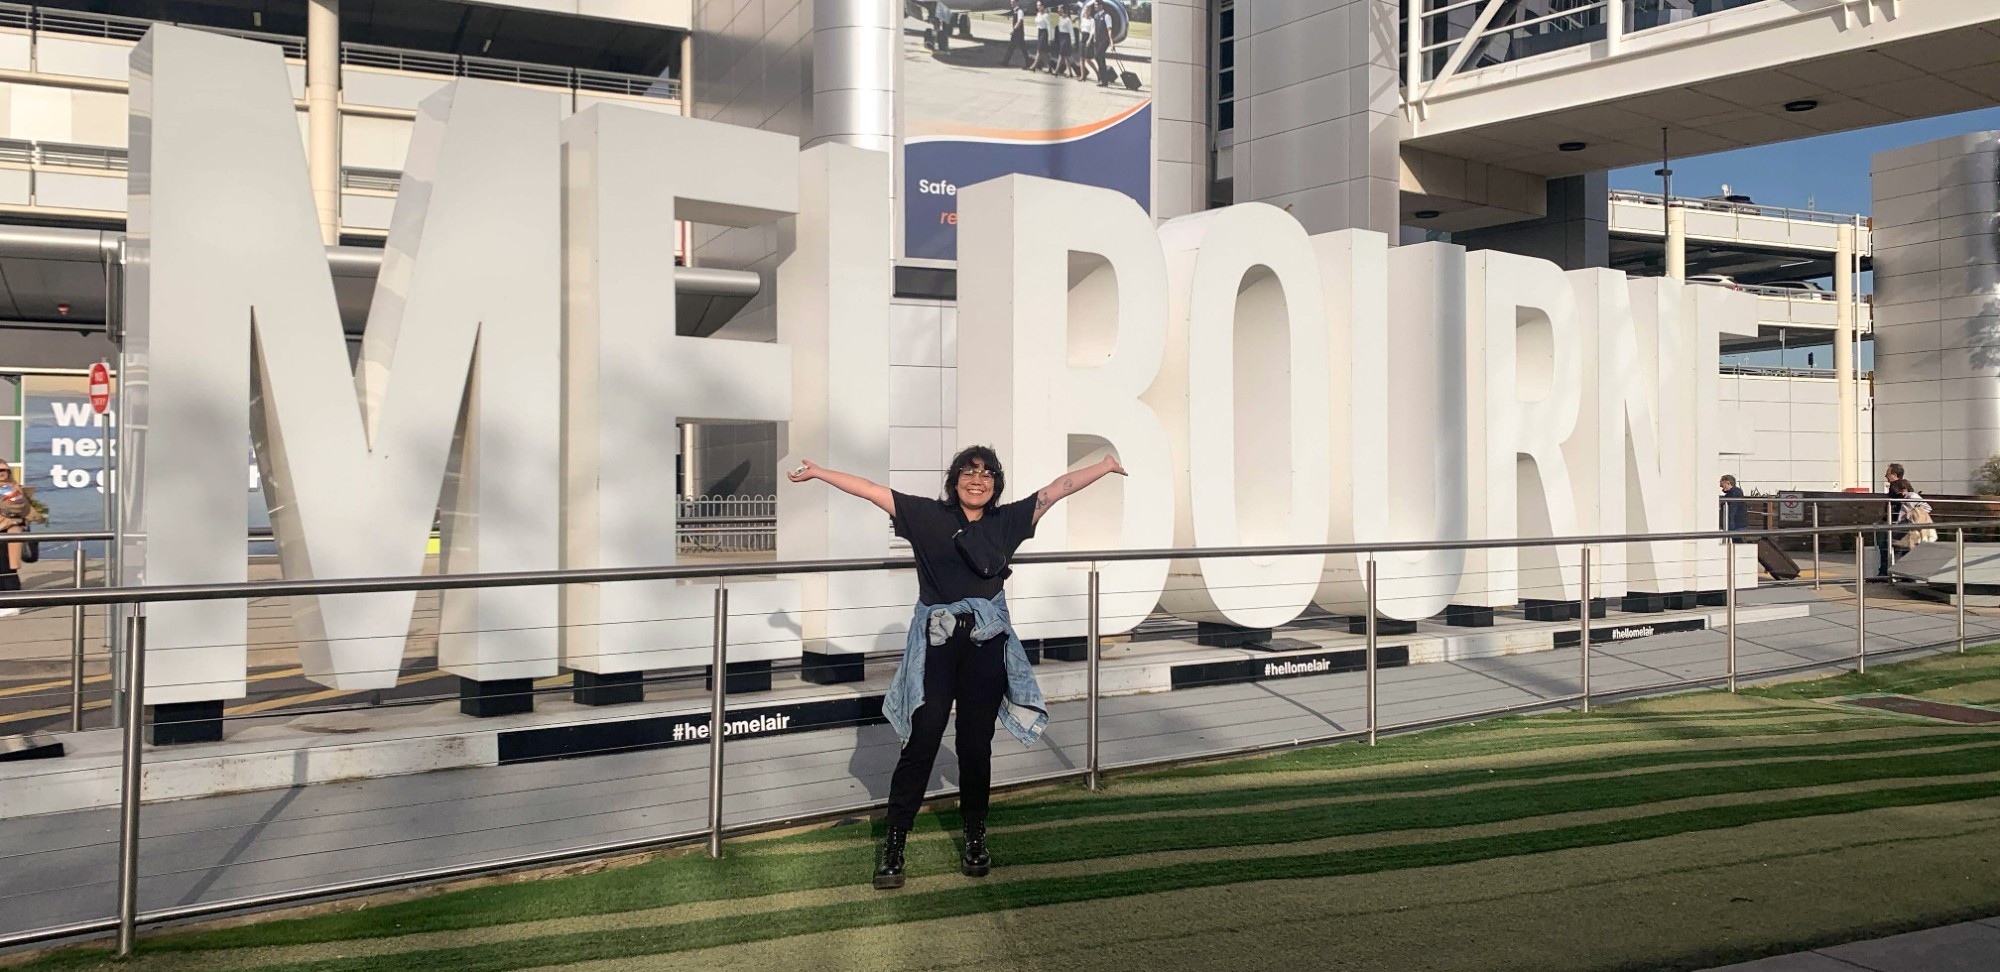 Junelle Knihniski upon arrival in Melbourne, Australia. Standing in front of large MELBOURNE sign at airport with outstretched arms overheard. 